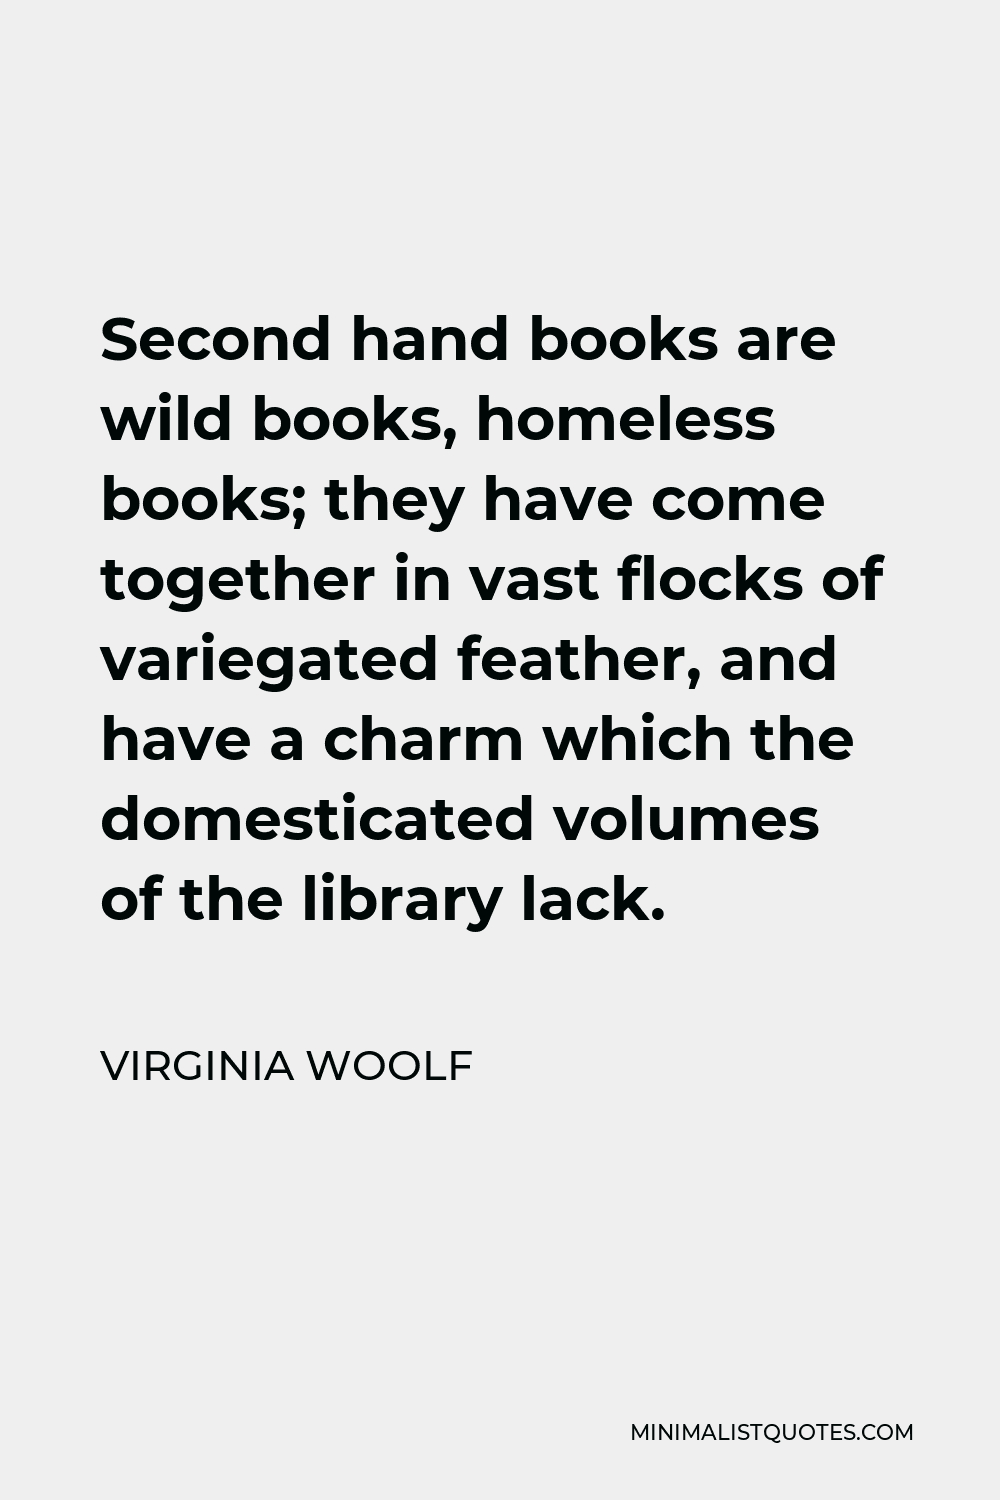 Virginia Woolf Quote - Second hand books are wild books, homeless books; they have come together in vast flocks of variegated feather, and have a charm which the domesticated volumes of the library lack.